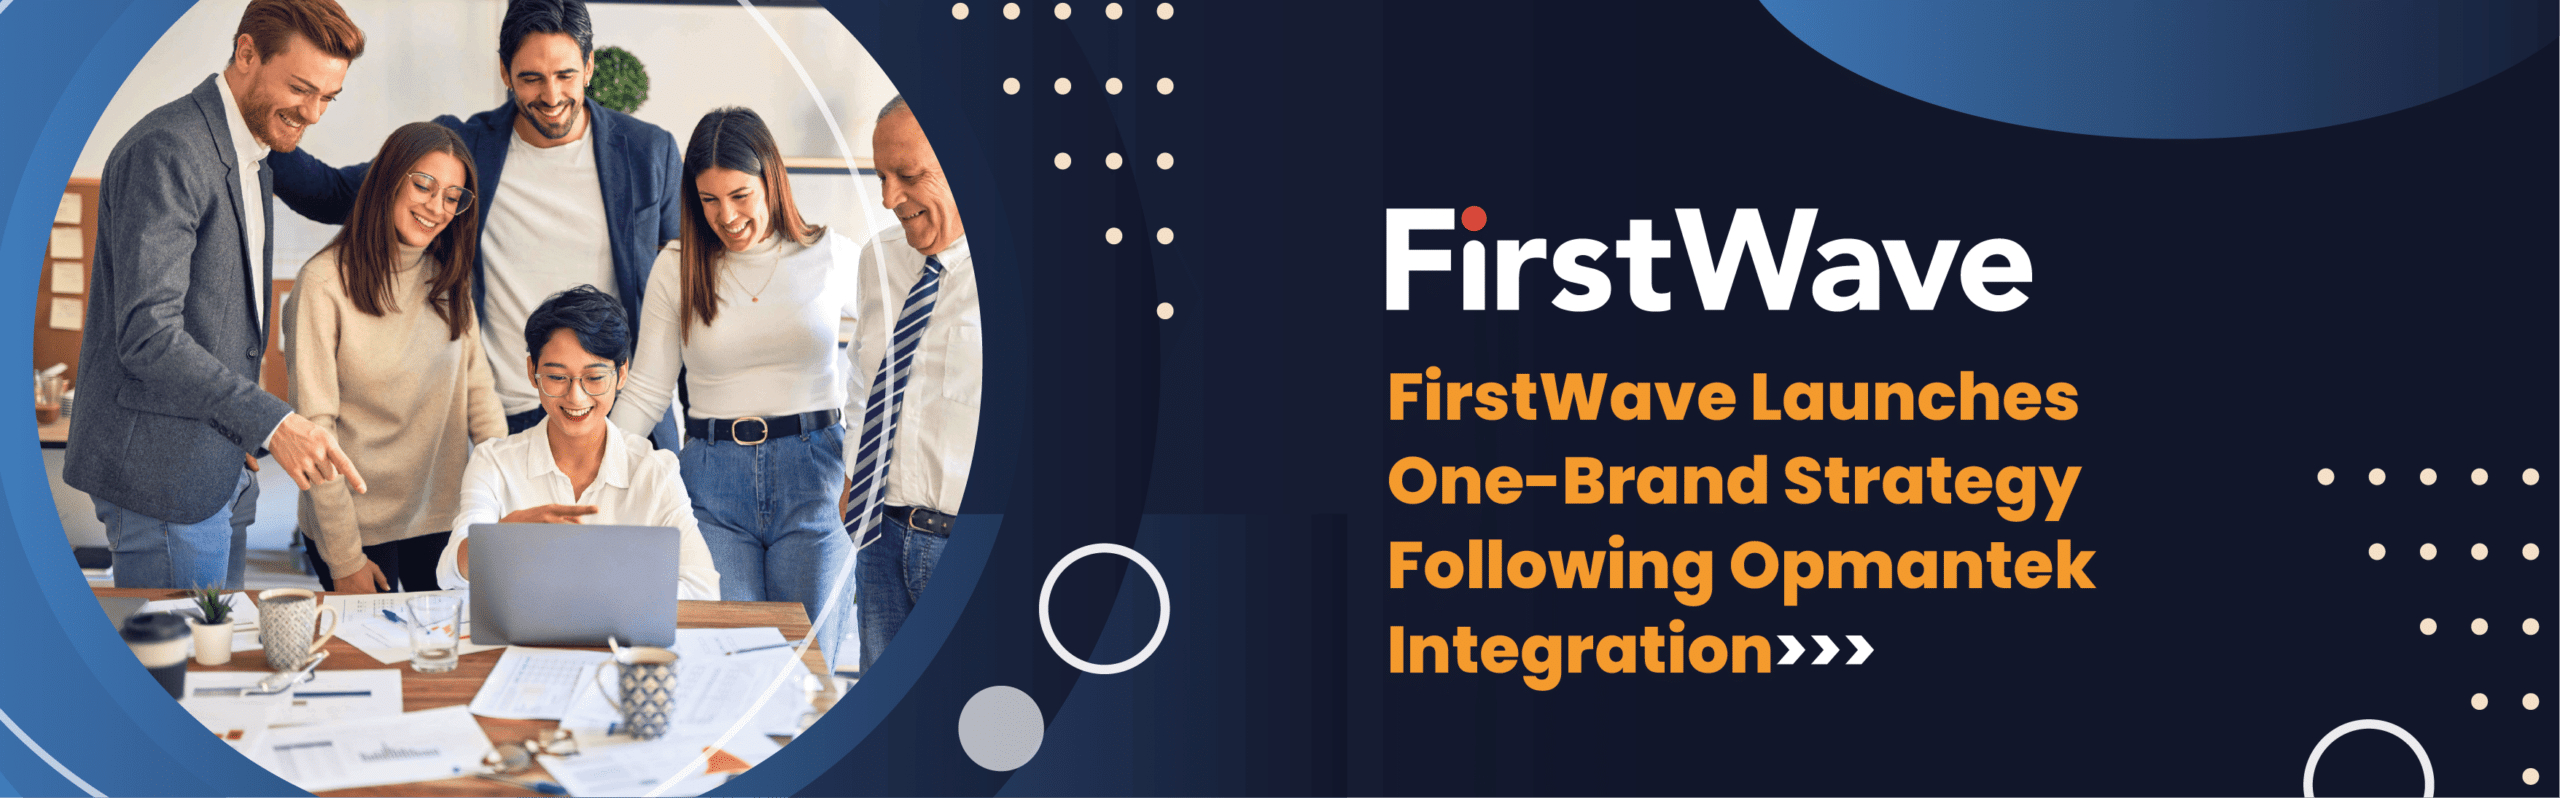 FirstWave Launches One-Brand Strategy Following Opmantek Integration - Featured Image